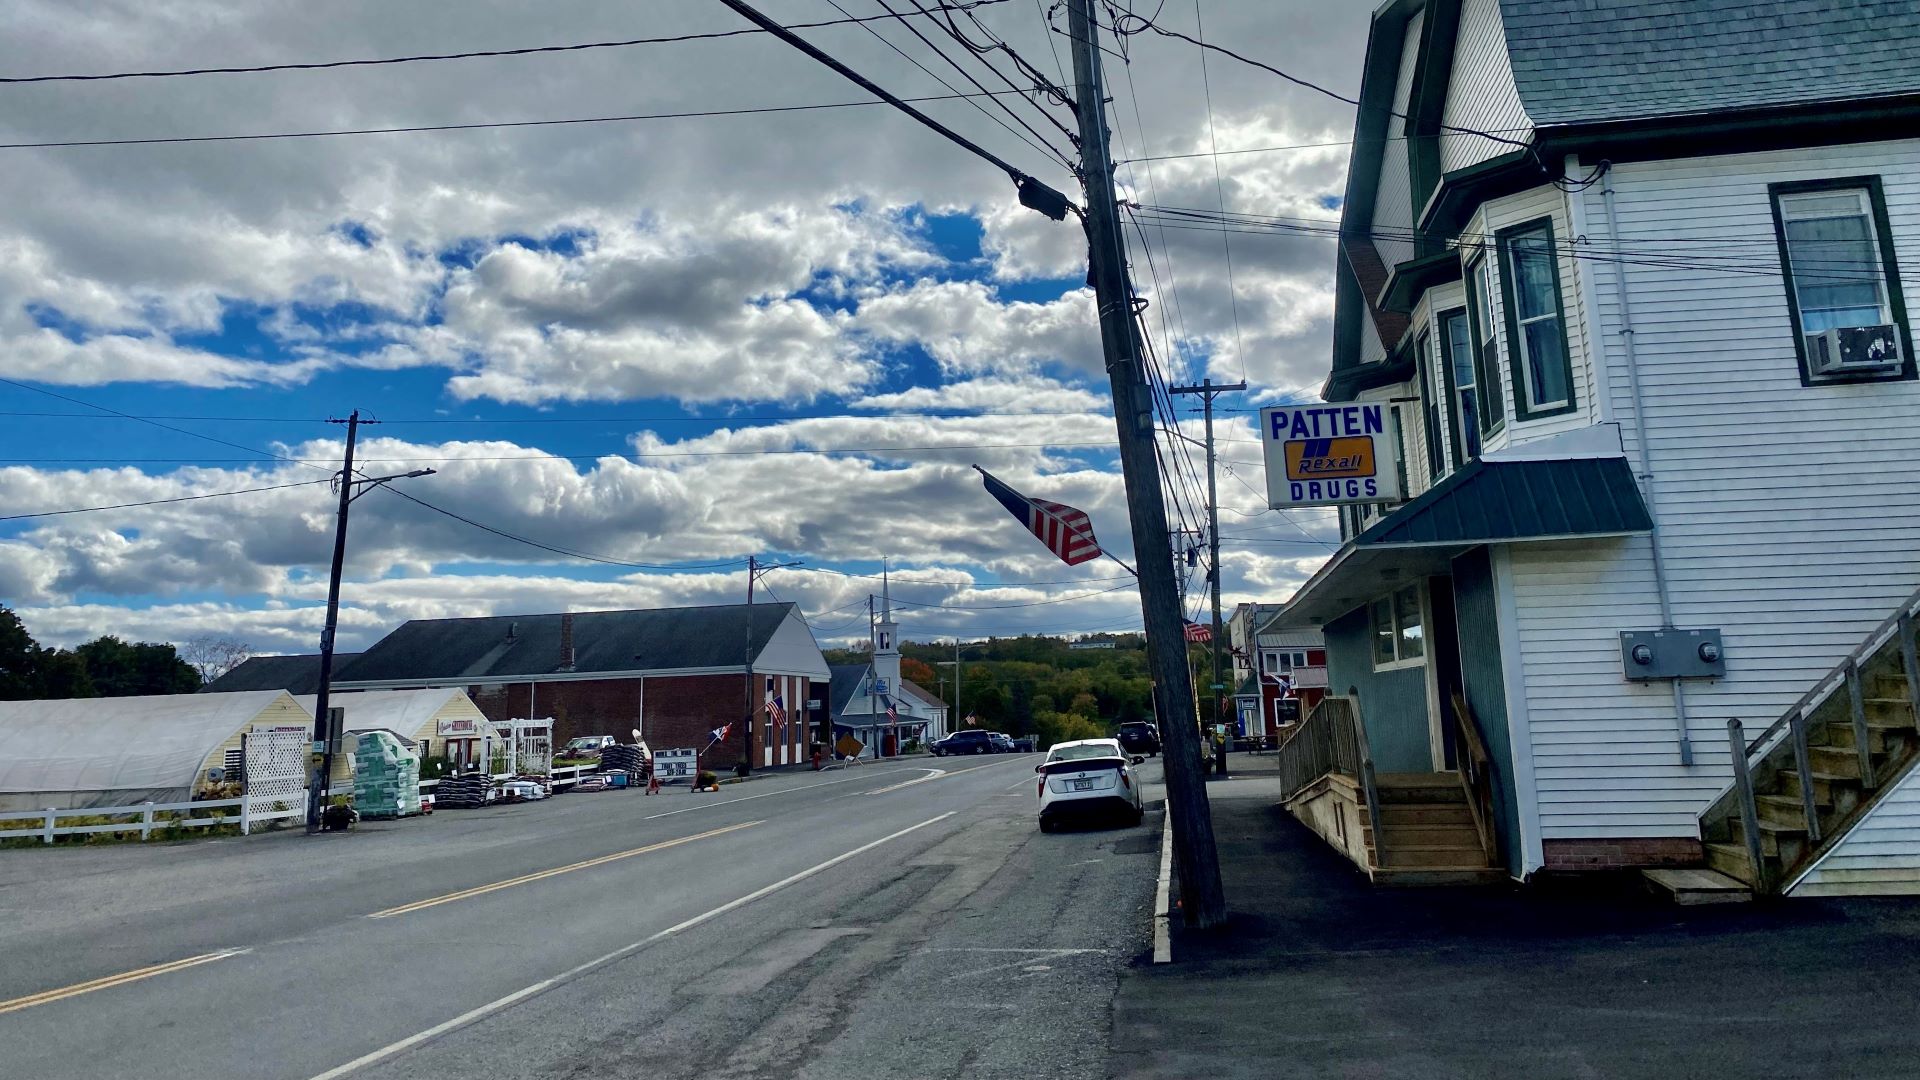 A view of a street lined on both sides with businesses in Patten, Maine